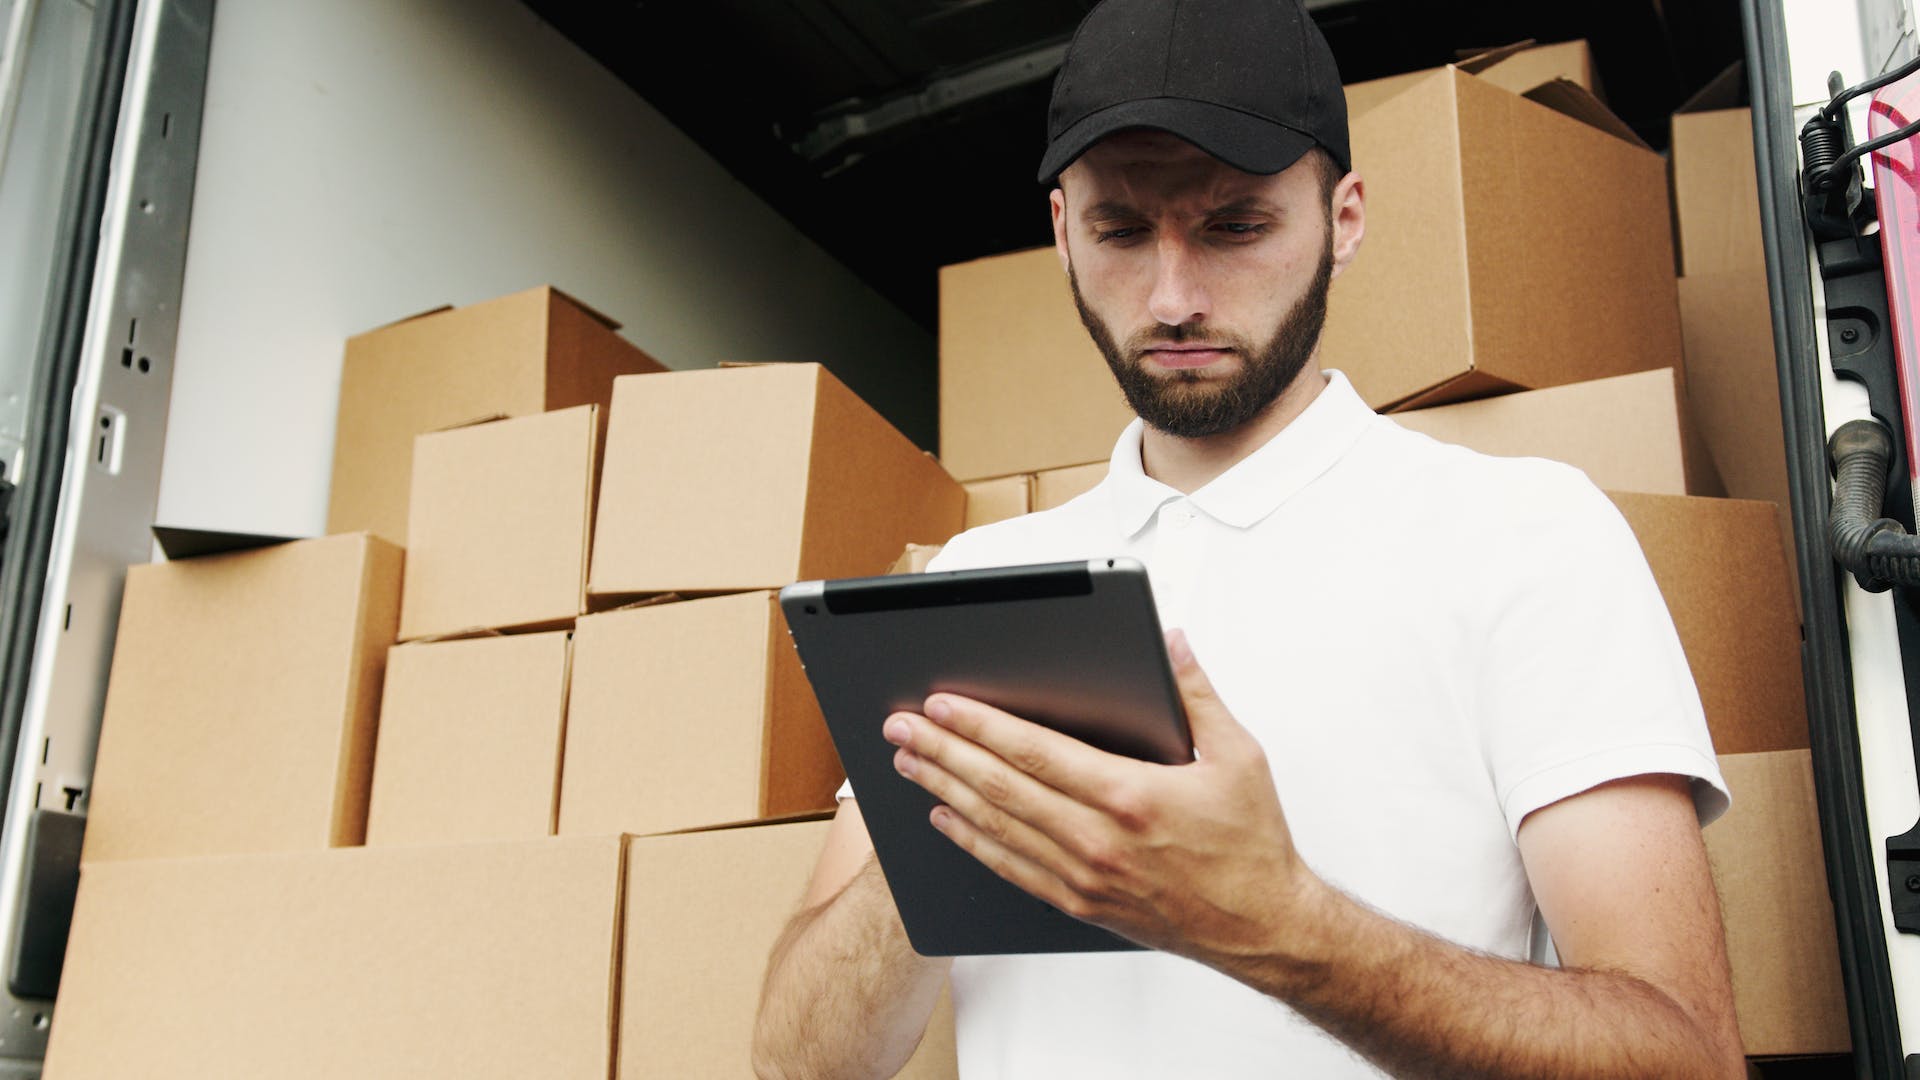 Man looking over checklist while frowning with multiple stacks of cardboard boxes packed into a moving van in the background